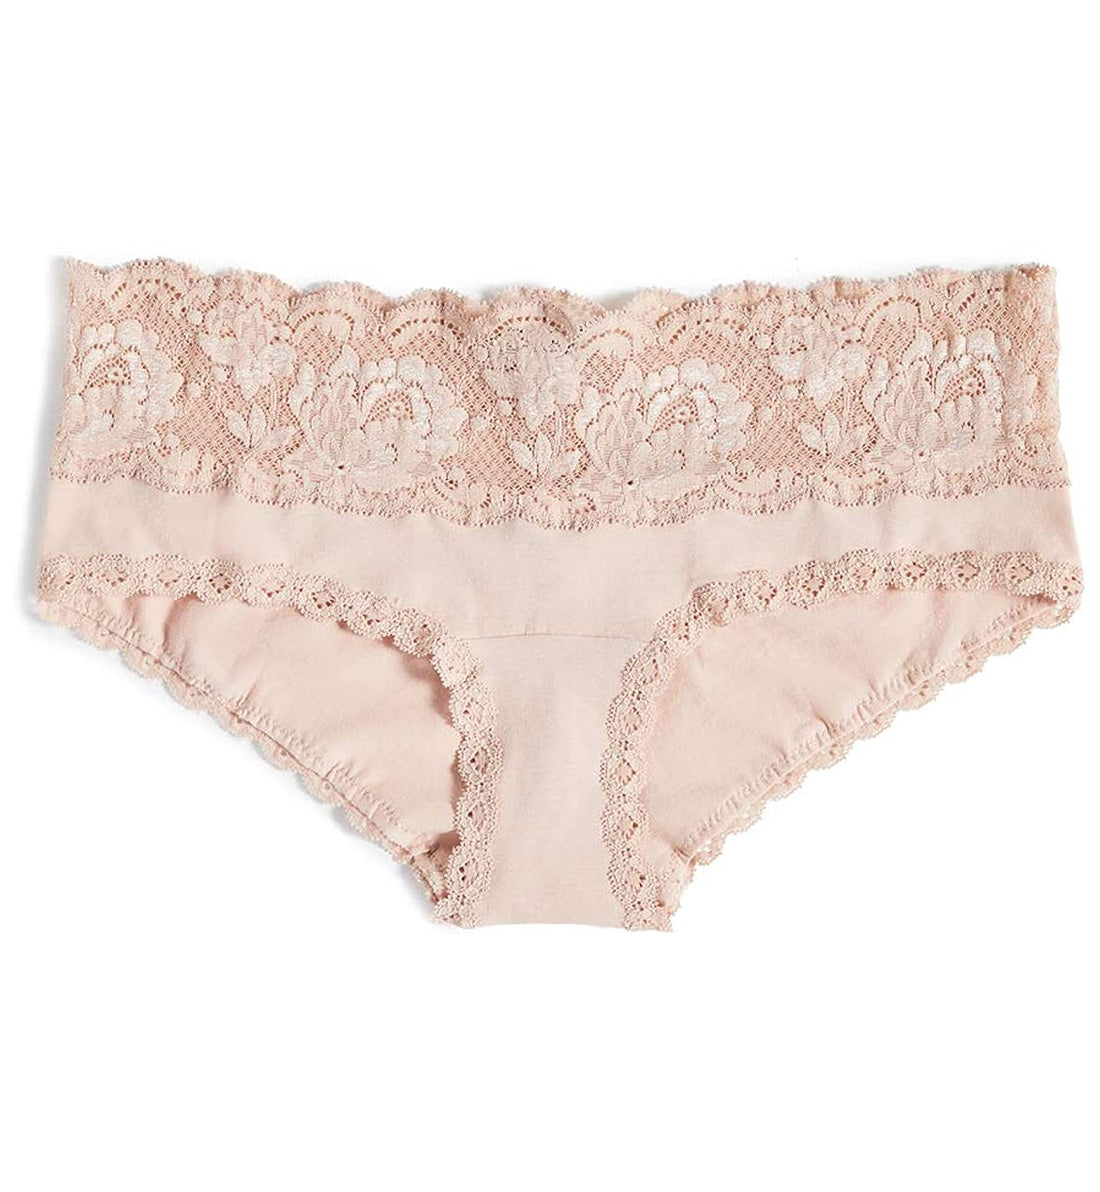 Cosabella Mommie Maternity Hotpant (NEVER0742),Small,Sette - Sette,Small